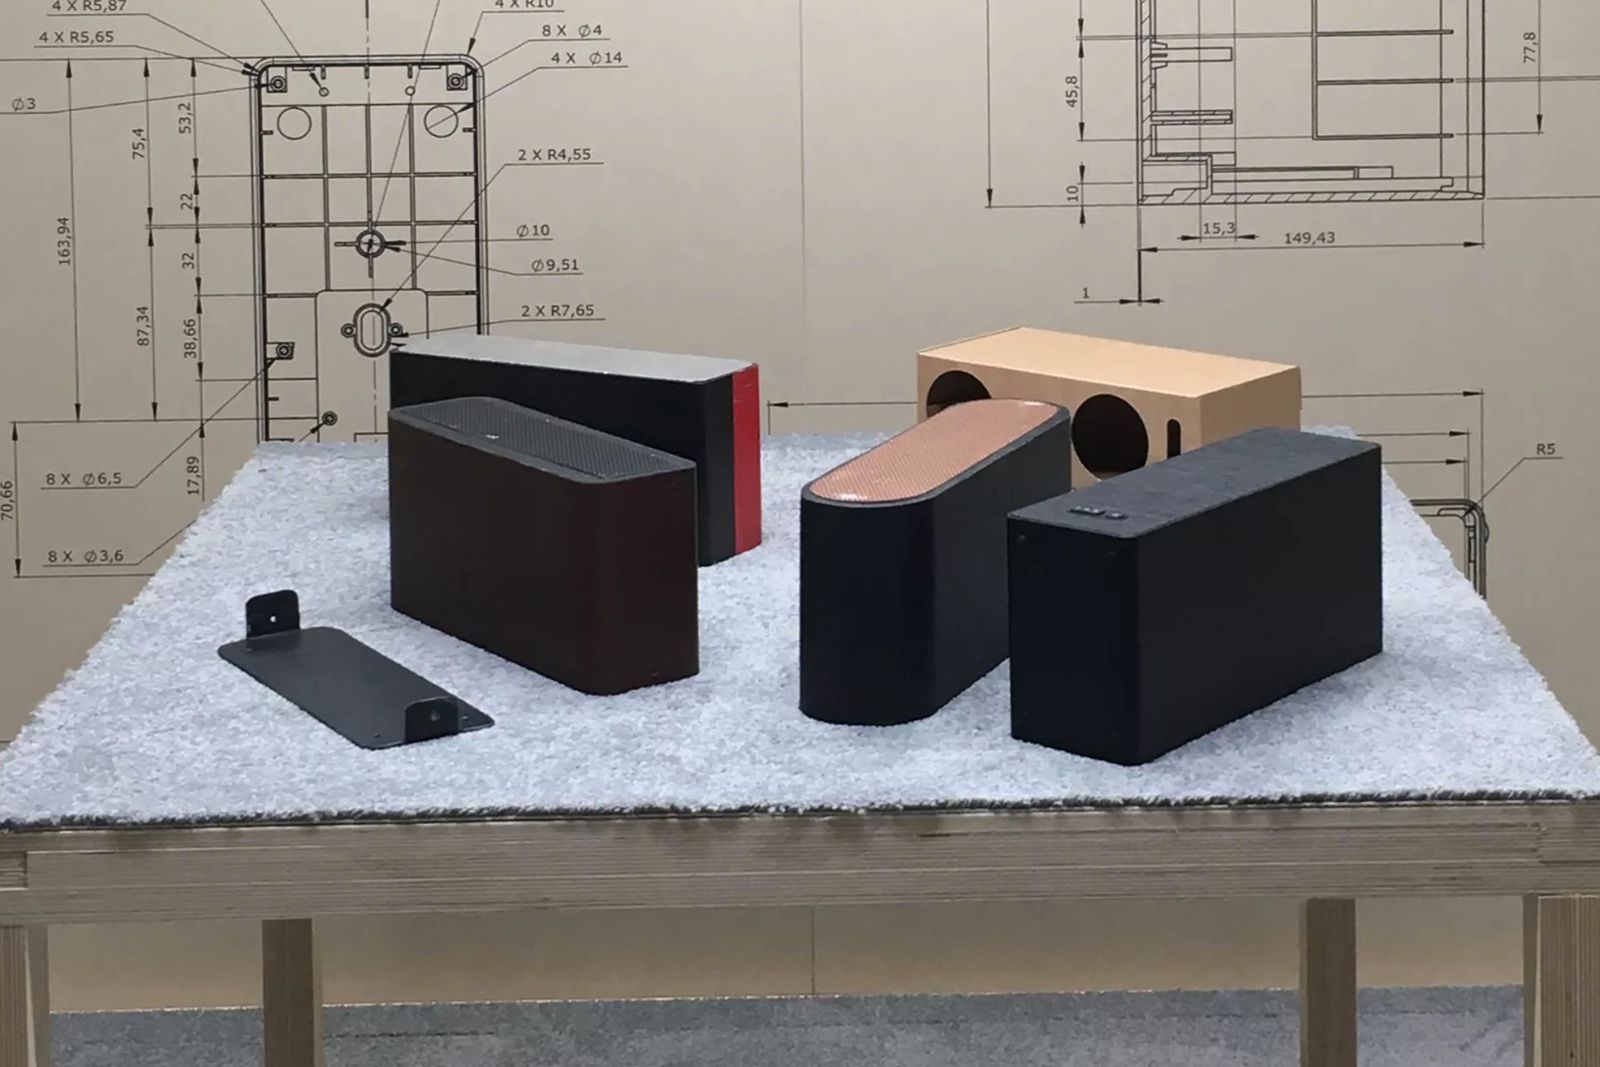 IKEA and Sonos display their first smart speaker prototypes image 1